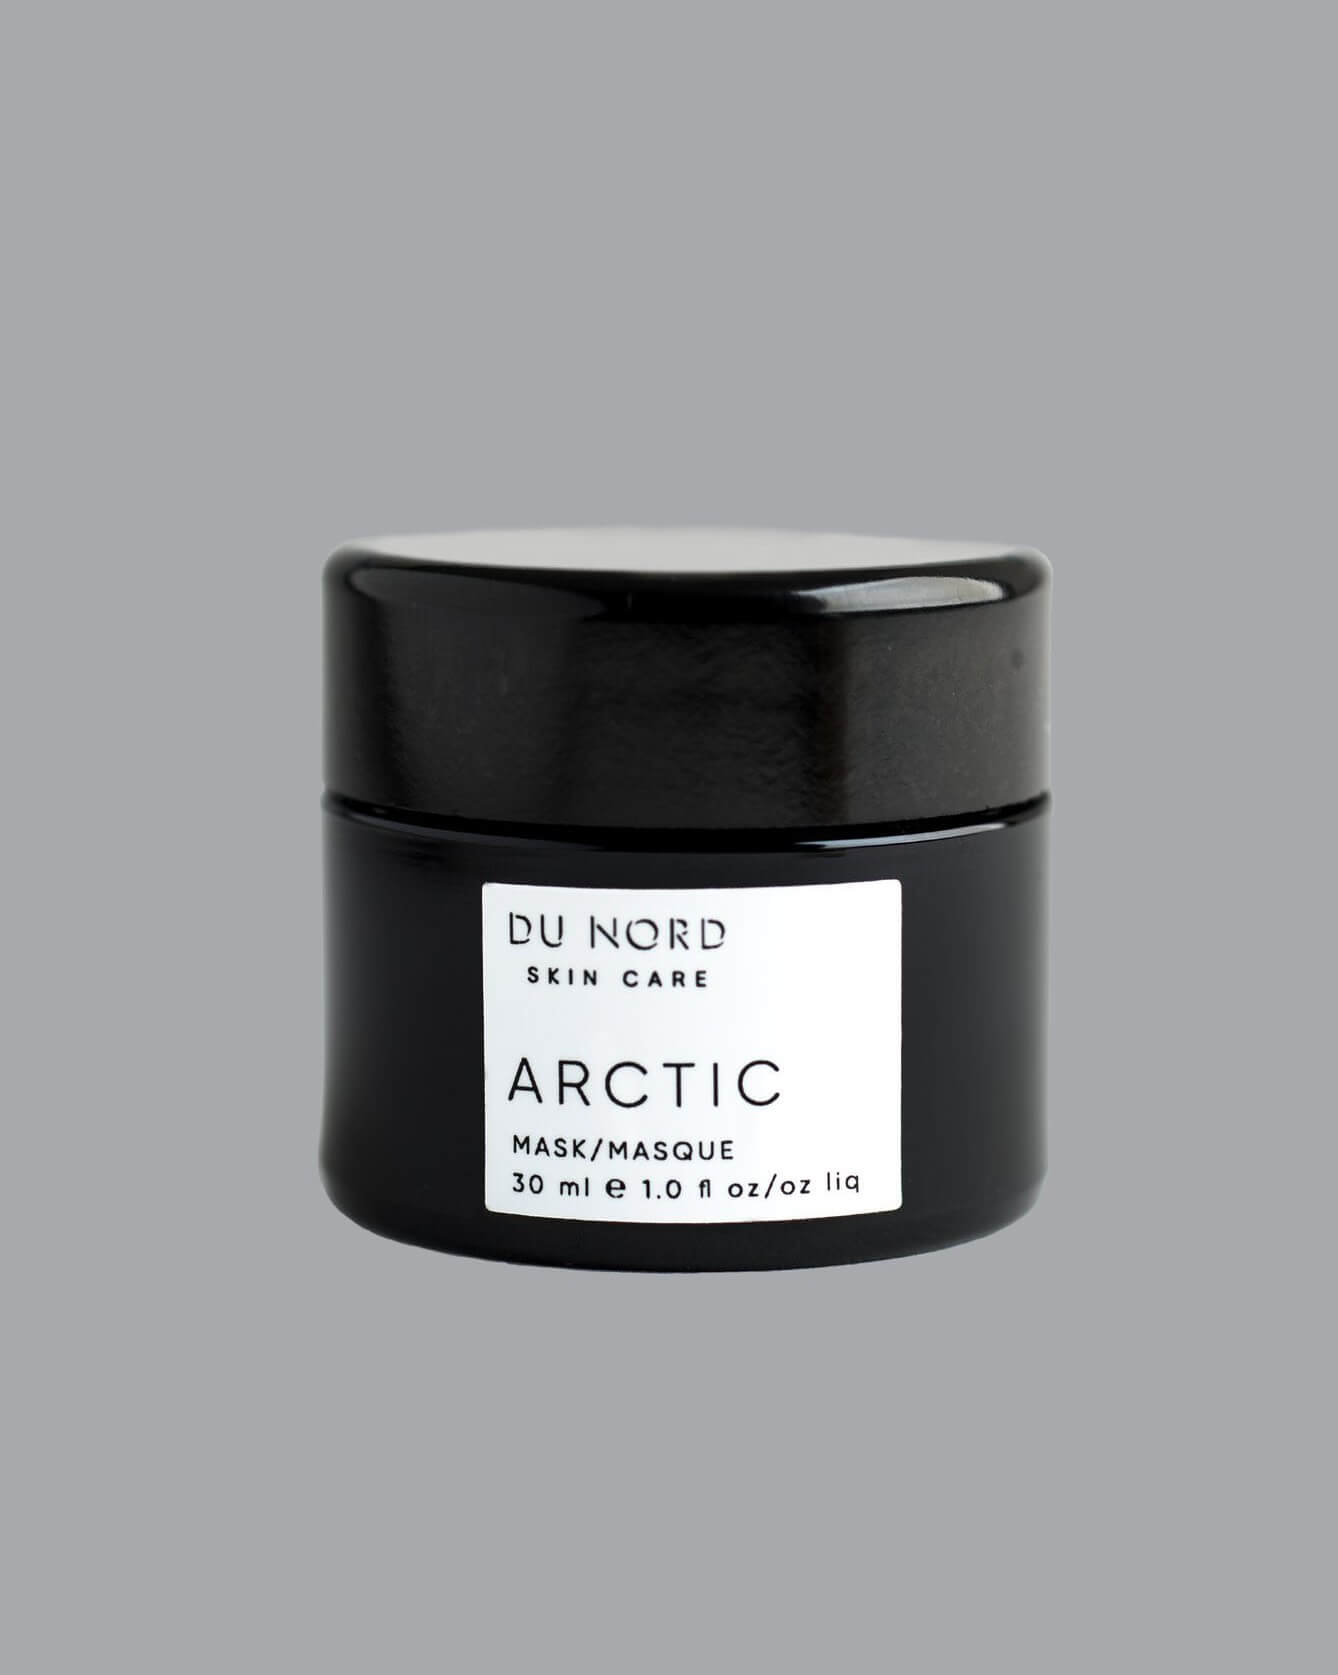 Oat Cosmetics product photo of DU-NORD Arctic mask.